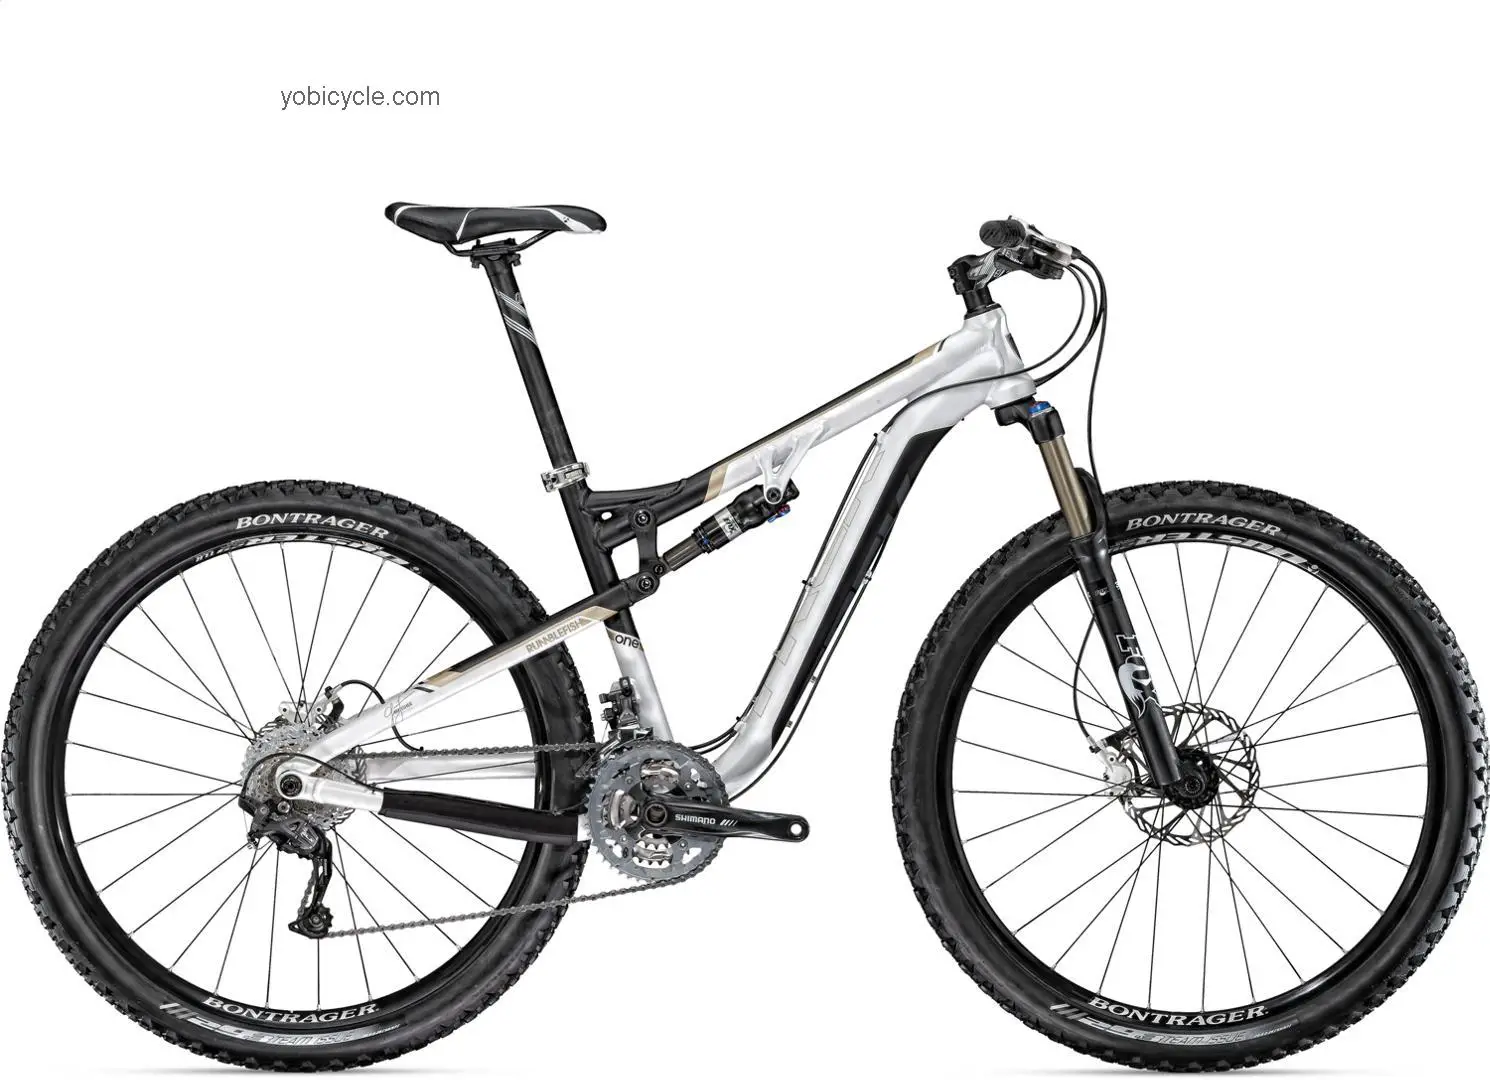 Trek Gary Fisher Rumblefish I 2011 comparison online with competitors